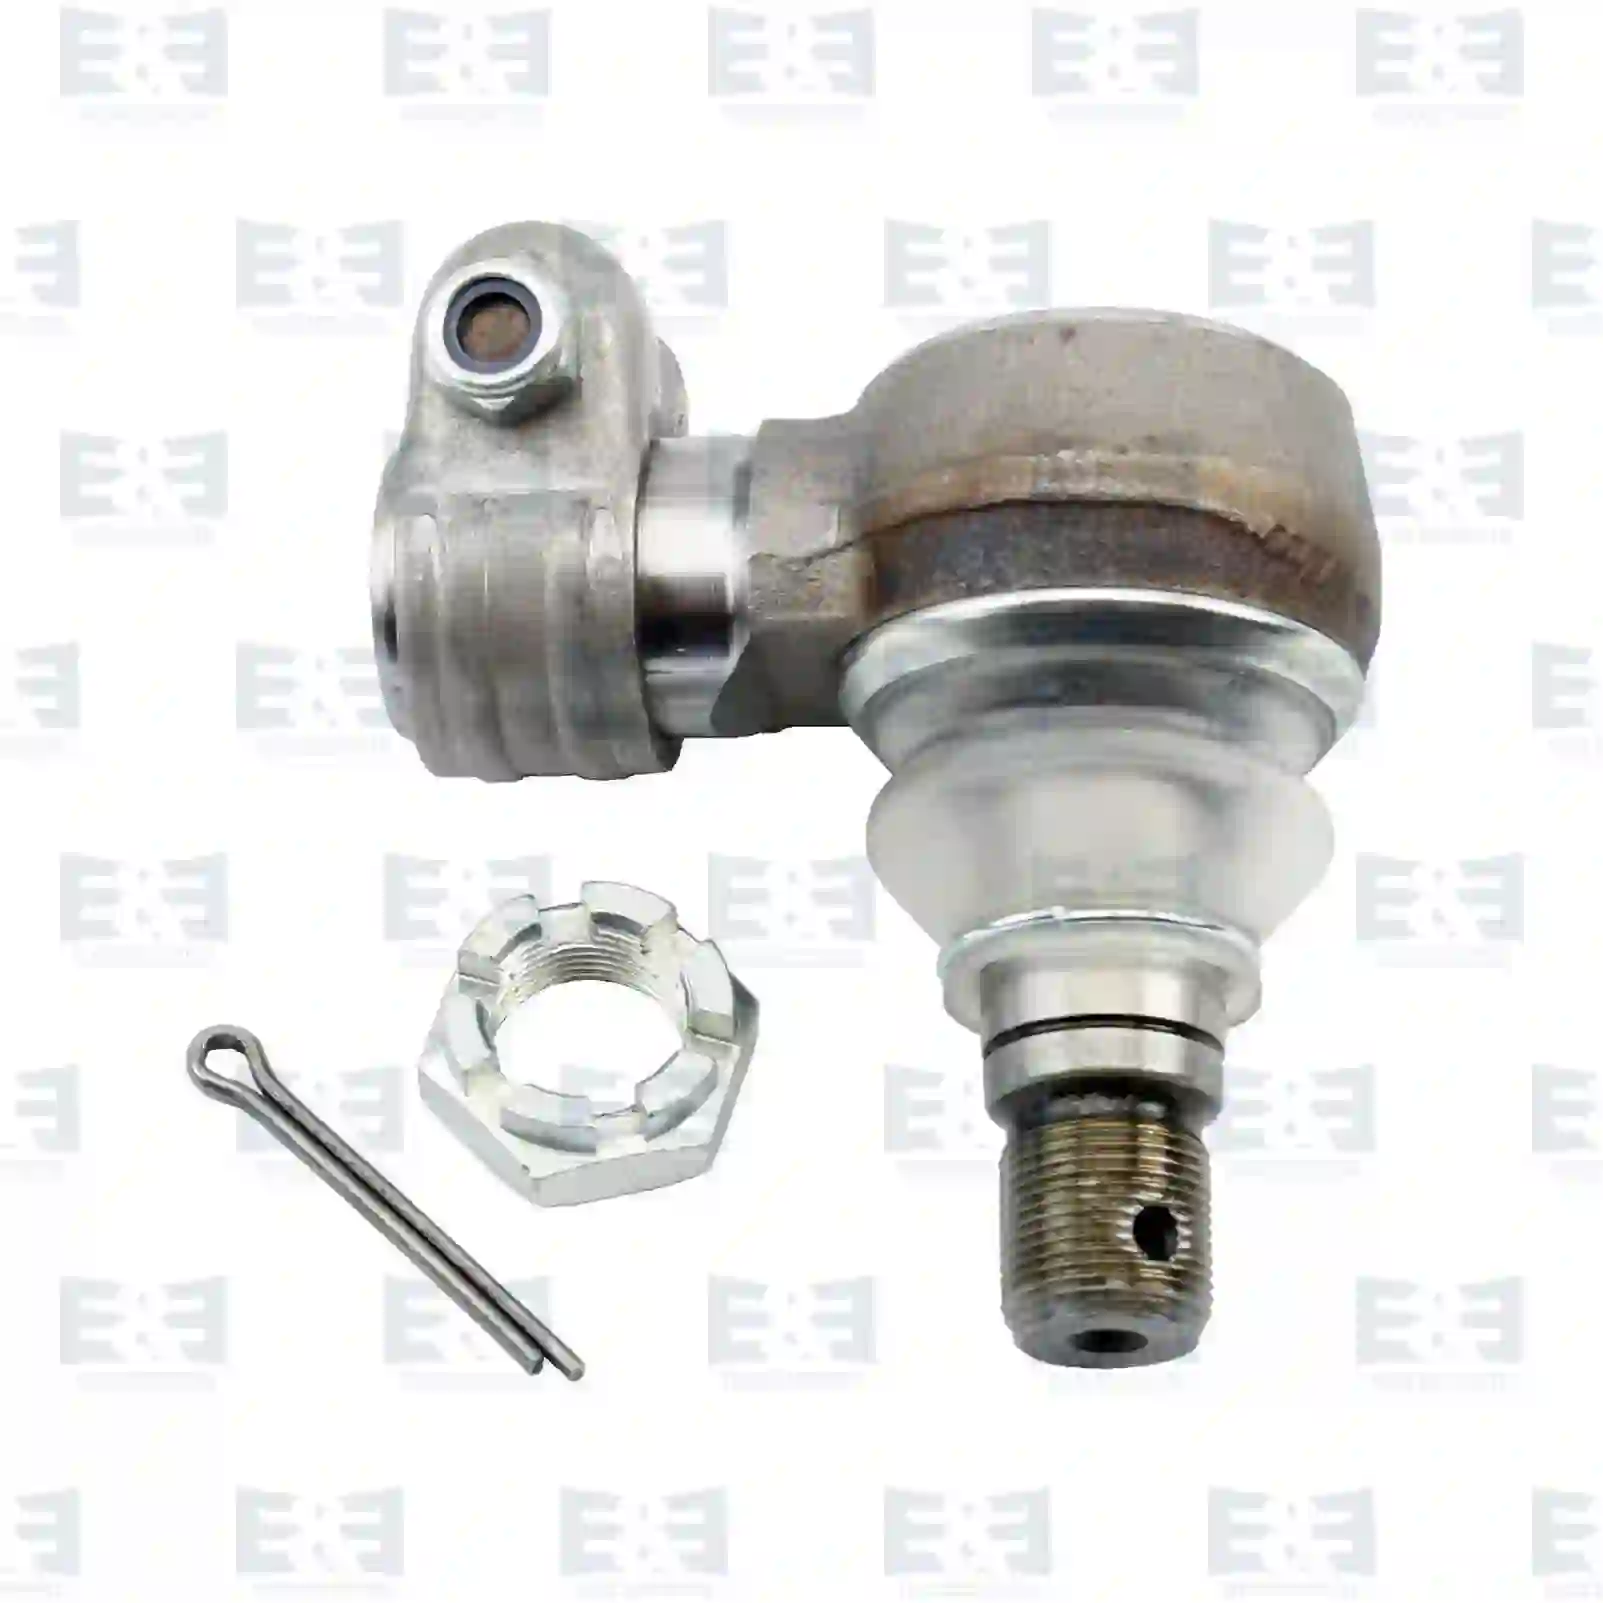 Rear Axle, Complete Ball joint, right hand thread, EE No 2E2270768 ,  oem no:42533102, 42533102, 81467036001, 81953016219, 81953016225, 81953016226, 81953016267, 81953016291, N1011019868, ZG40386-0008 E&E Truck Spare Parts | Truck Spare Parts, Auotomotive Spare Parts